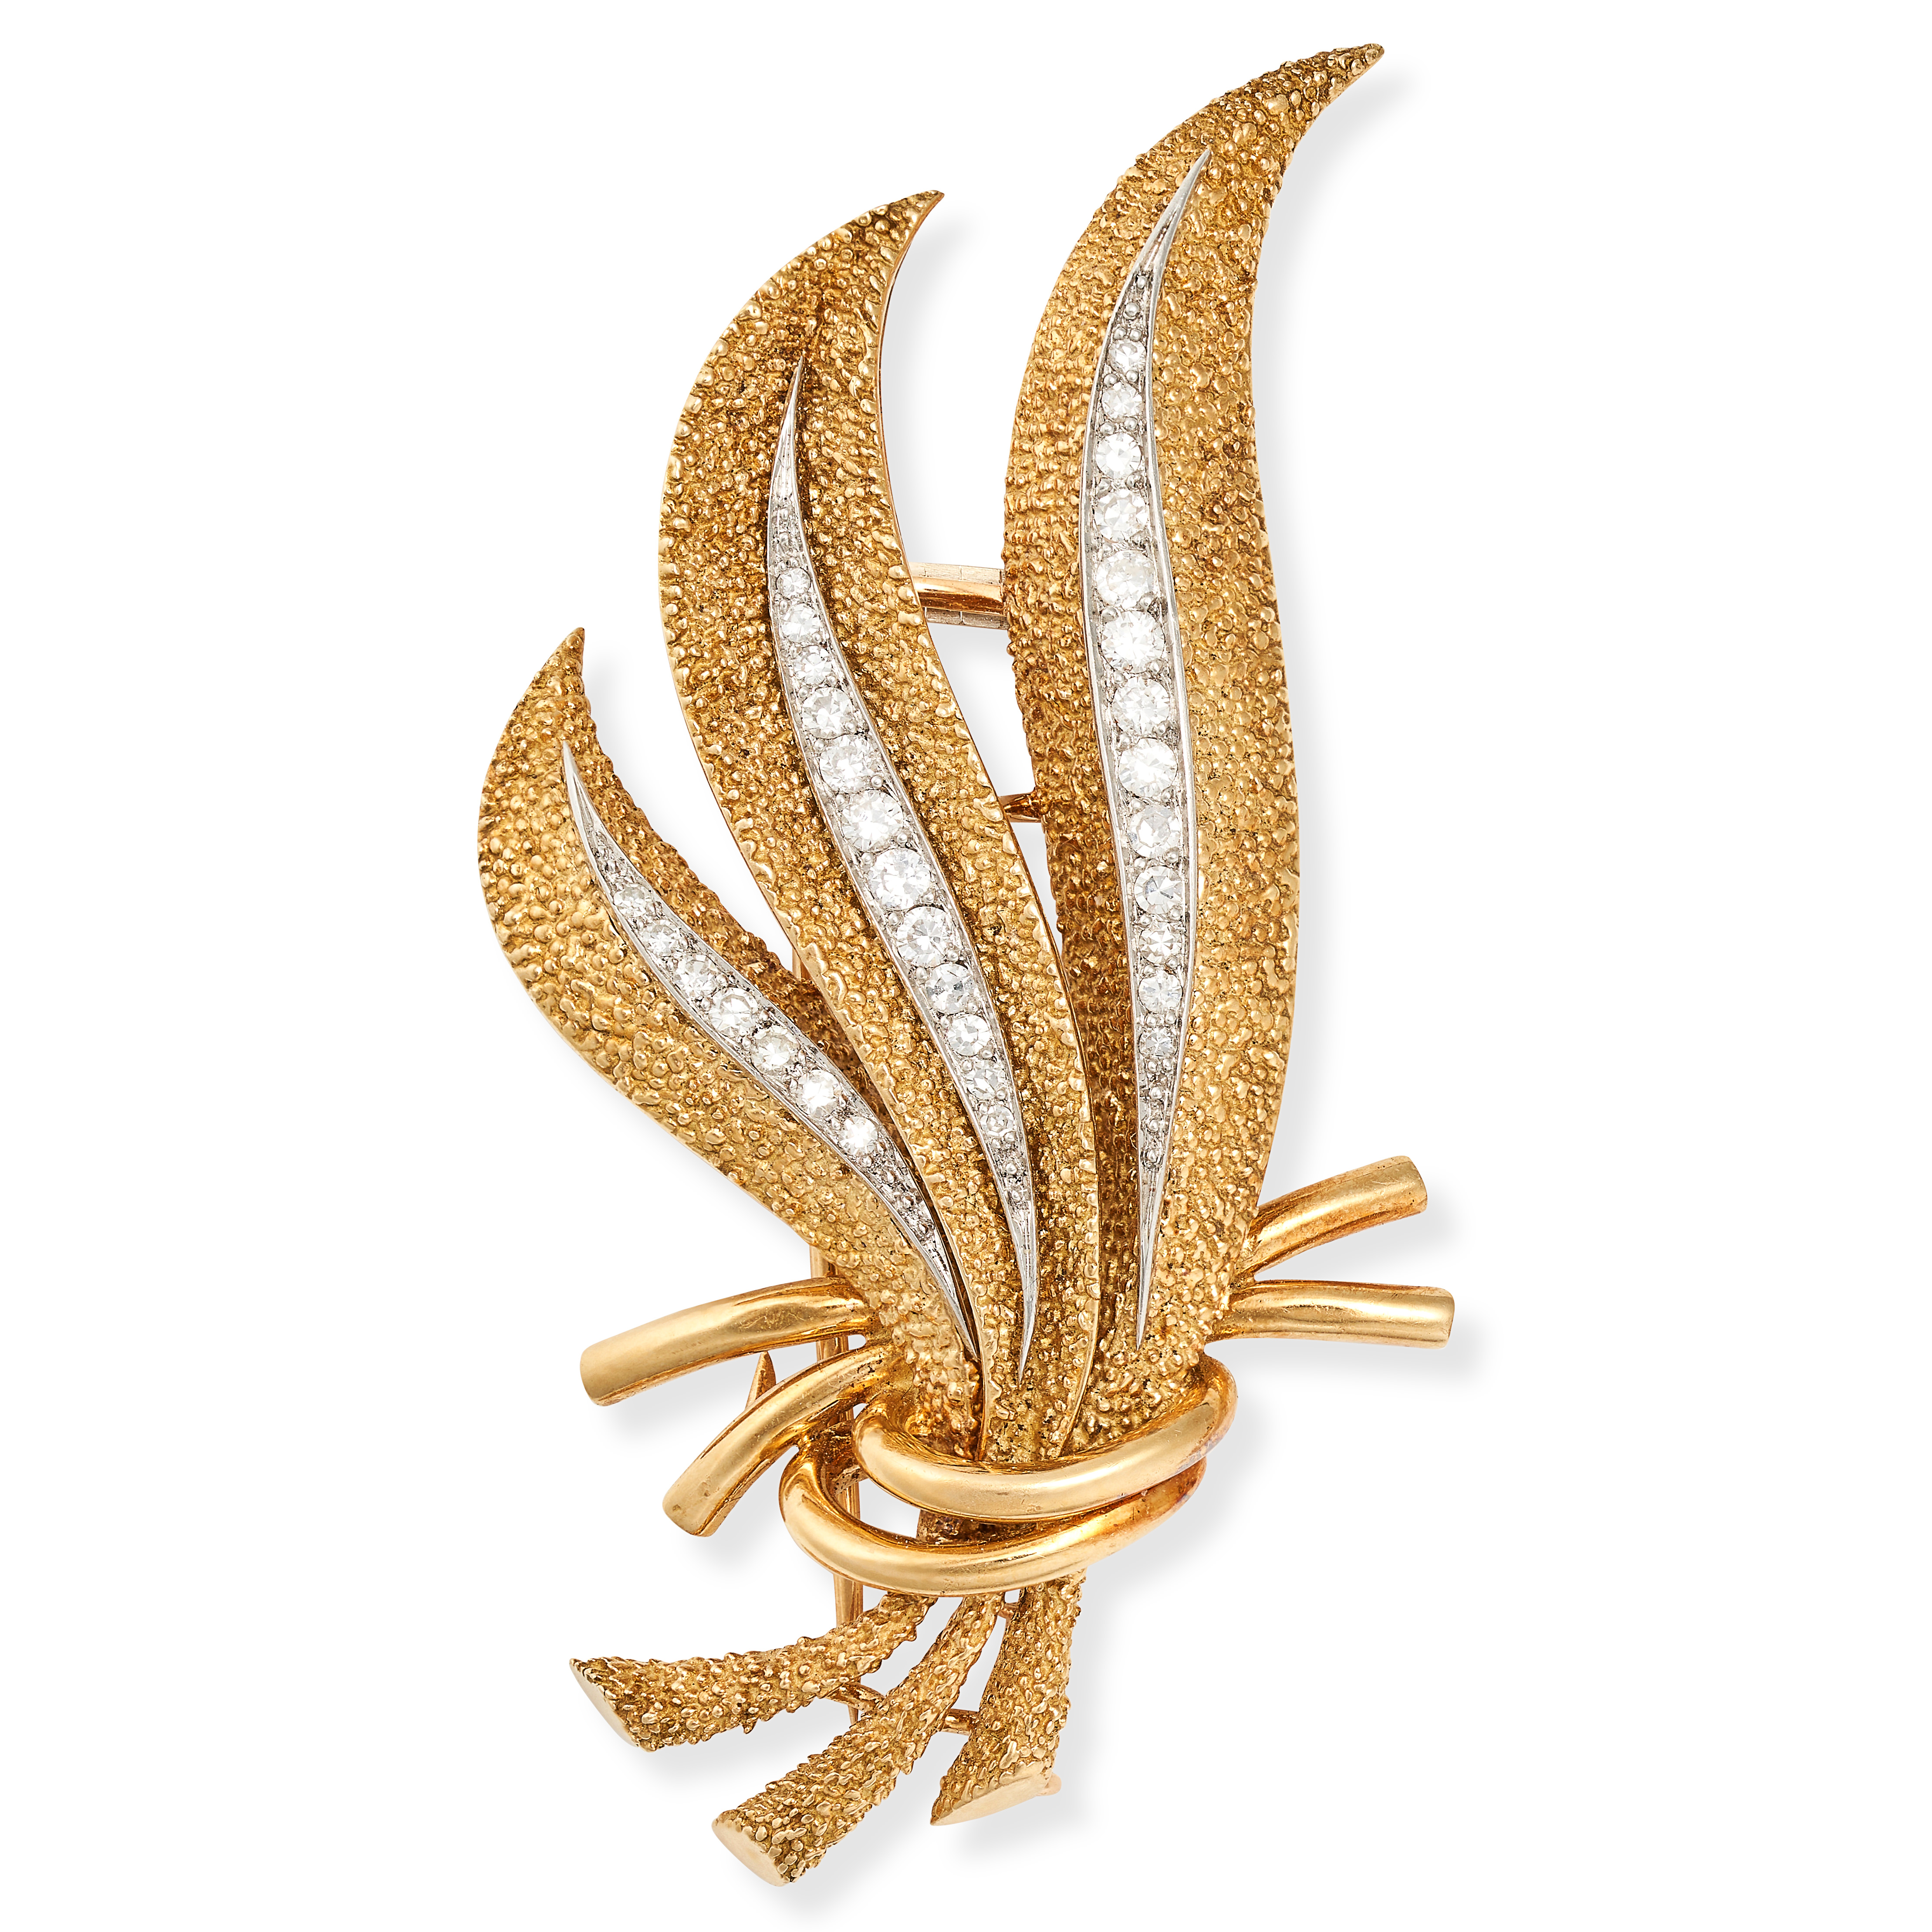 A VINTAGE DIAMOND SPRAY BROOCH in 18ct yellow gold and platinum, designed as an abstract floral b...